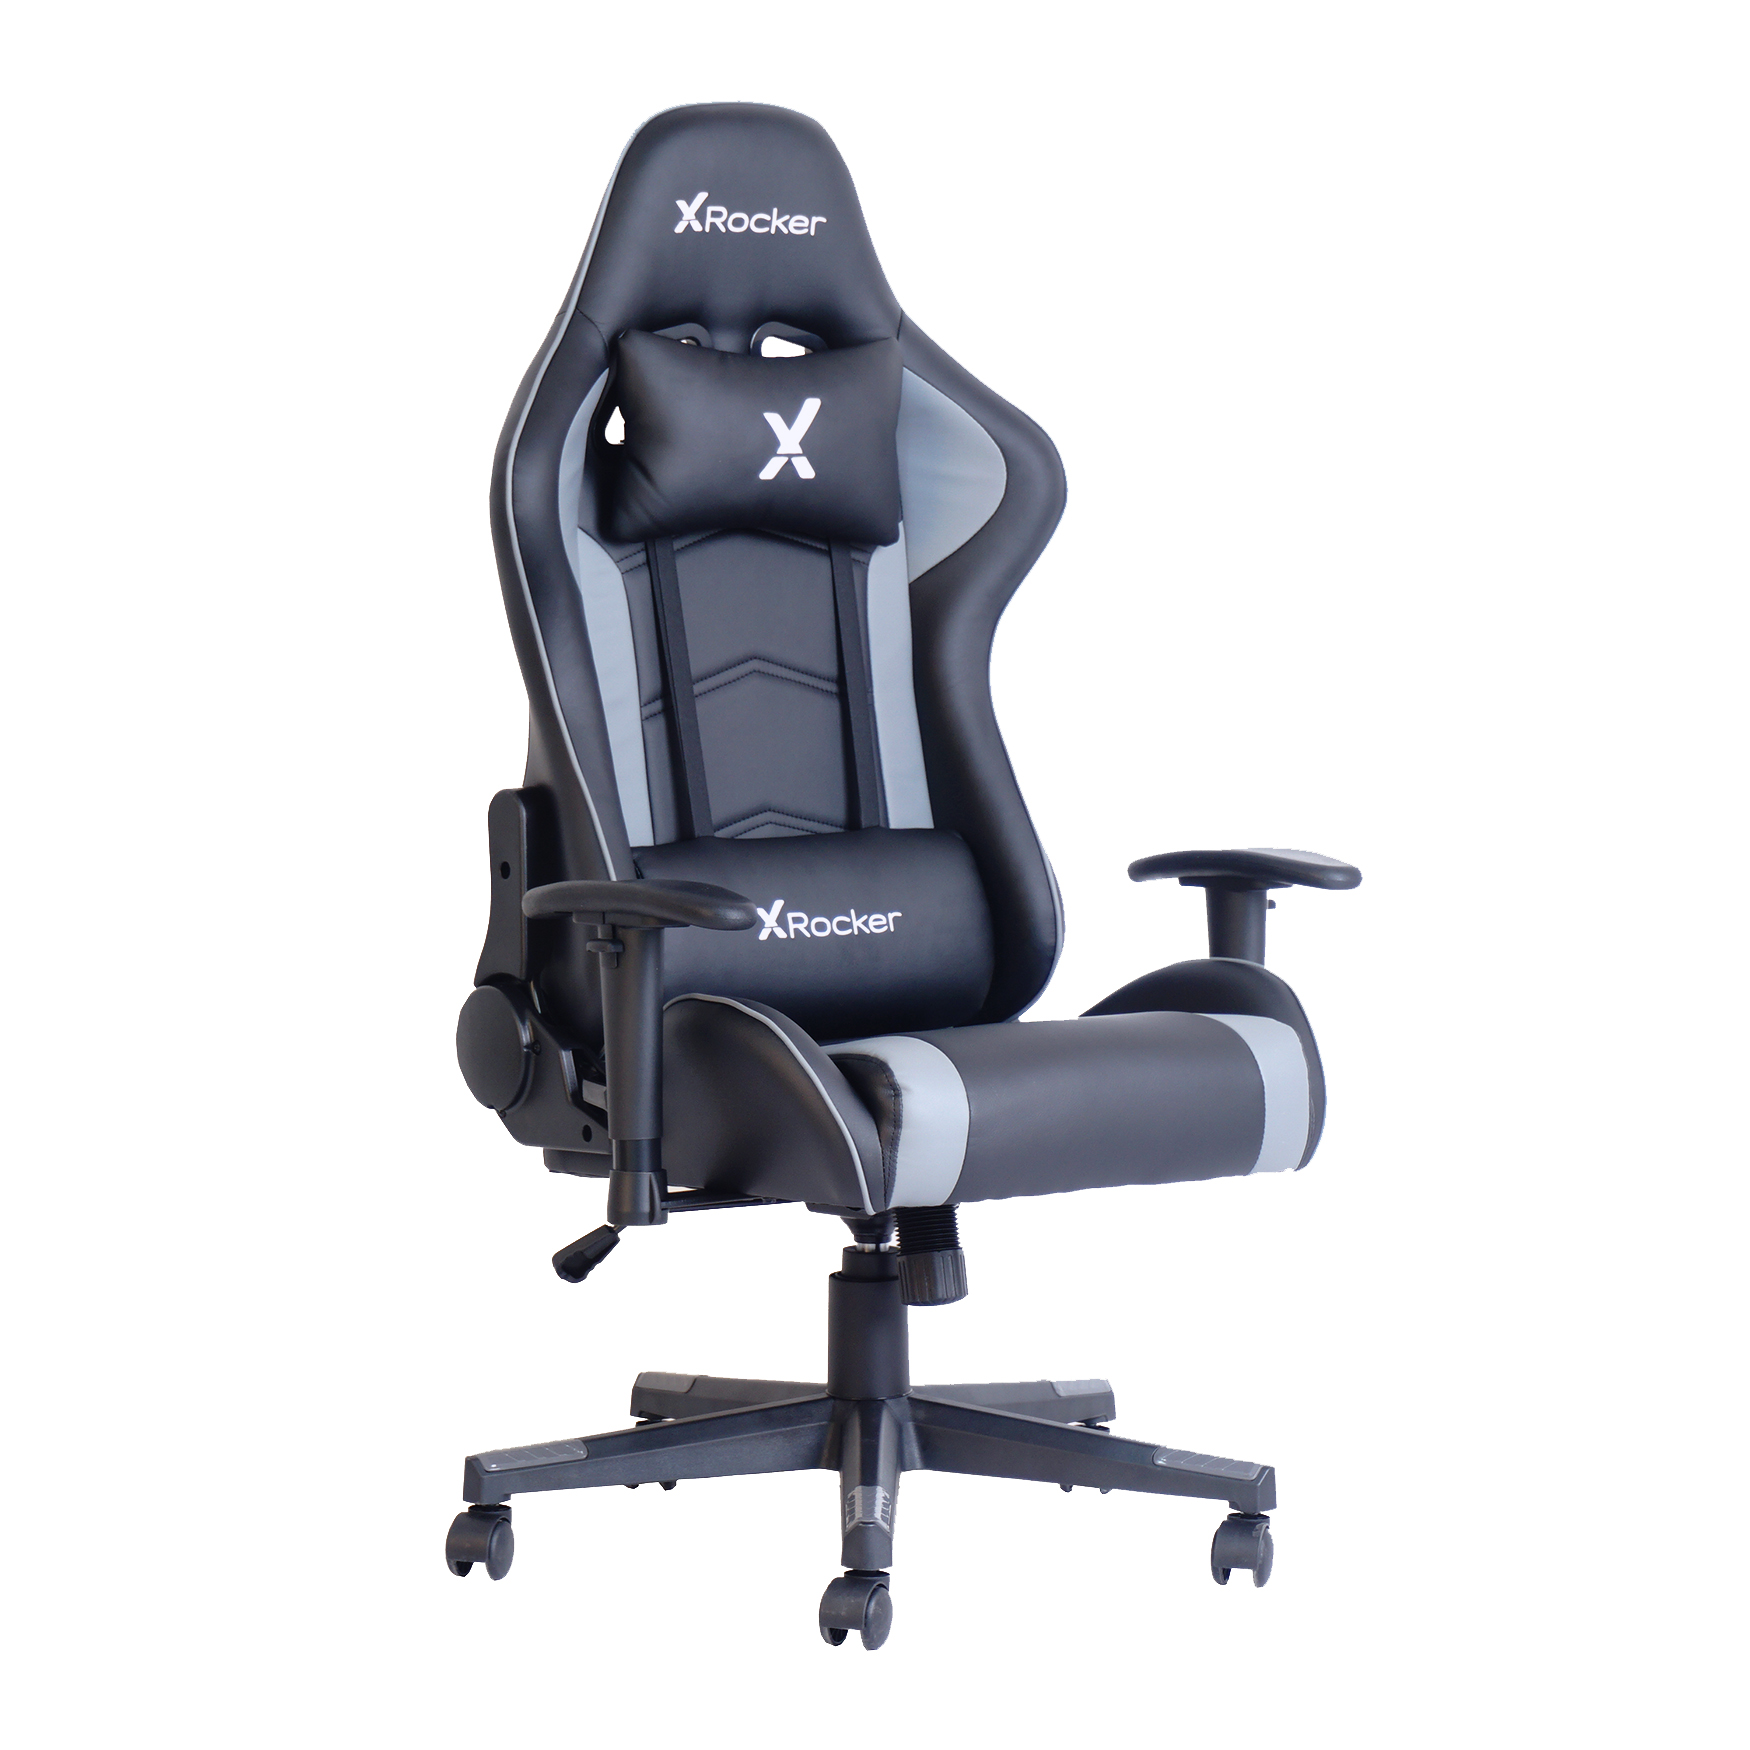 X Rocker Vortex Leather PC Gaming Chair, Black and Gray, 24.8" x 27.17" x 48.22-51.97" - image 1 of 10